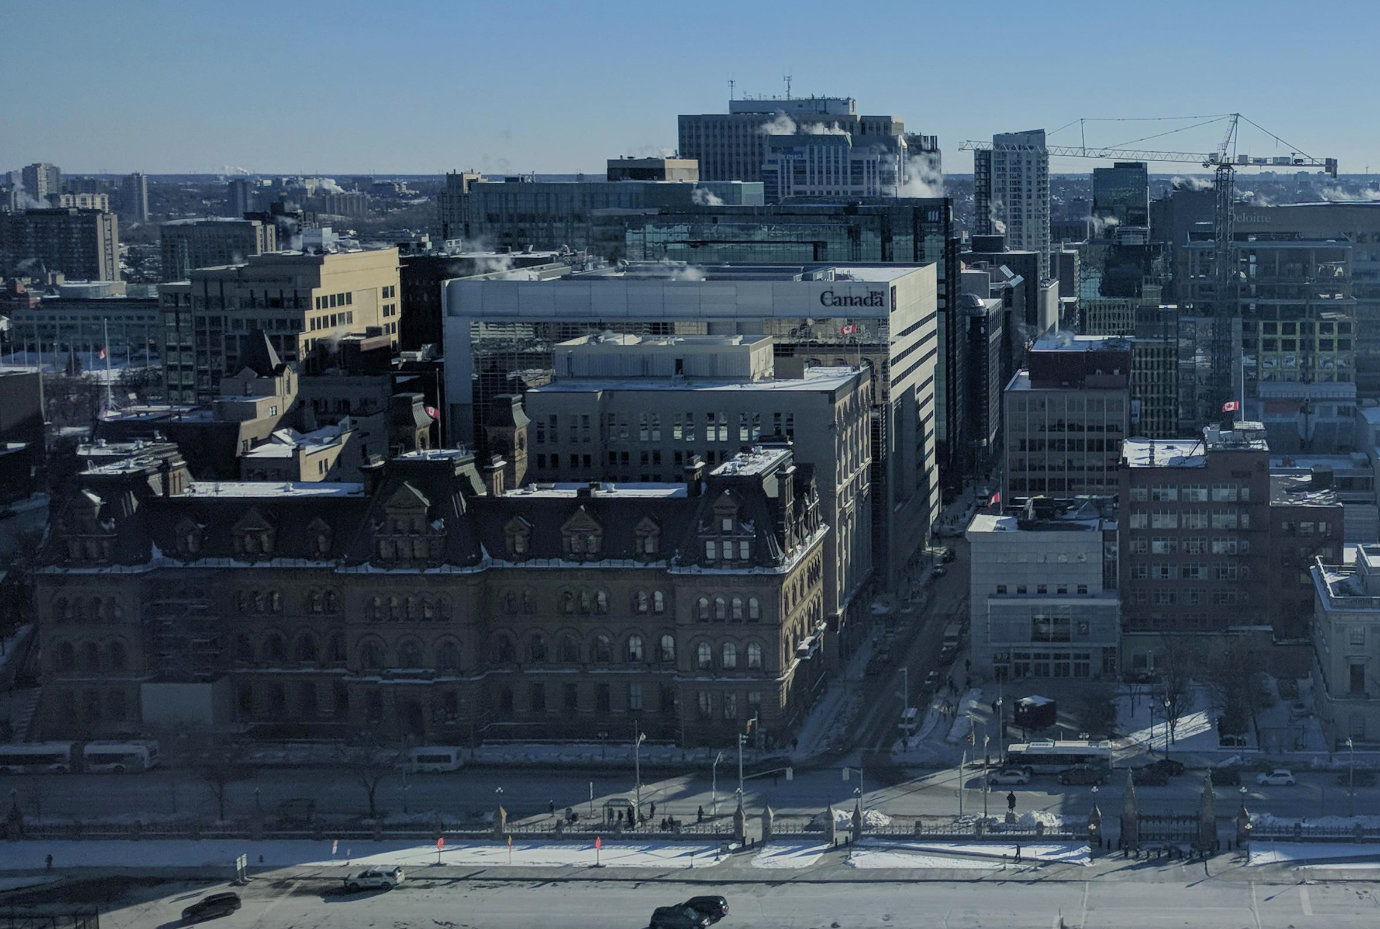 A view of the Office of the Prime Minister and Privy Council (formerly Langevin Block) and nearby buildings, taken from the Peace Tower on Parliament Hill in early 2019.